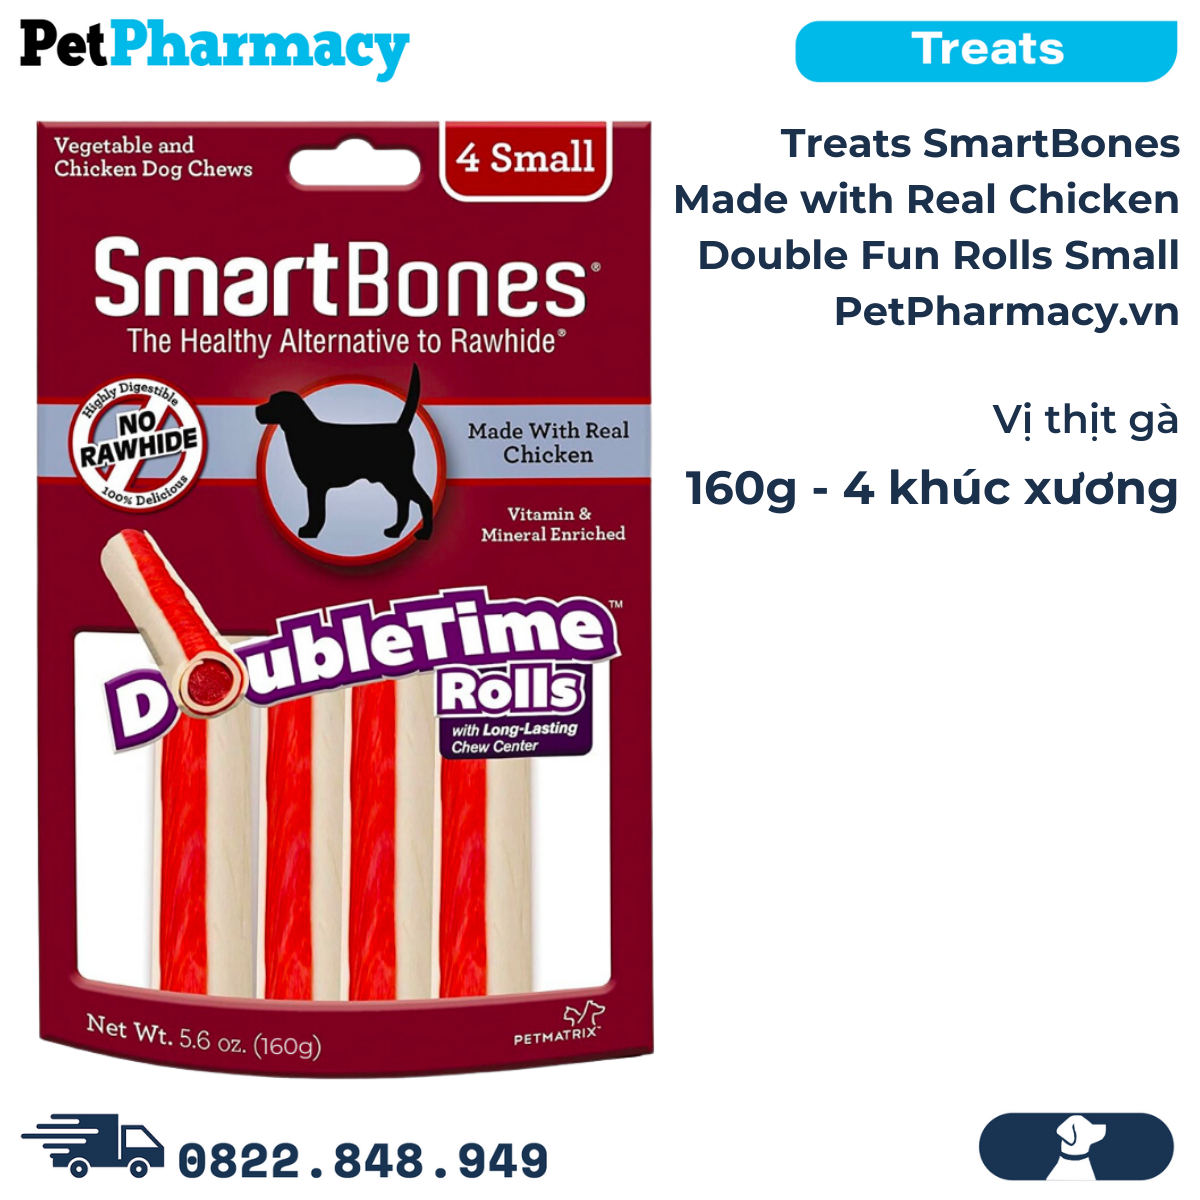 Treats SmartBones made with Real Chicken Double Fun Rolls Small 160g